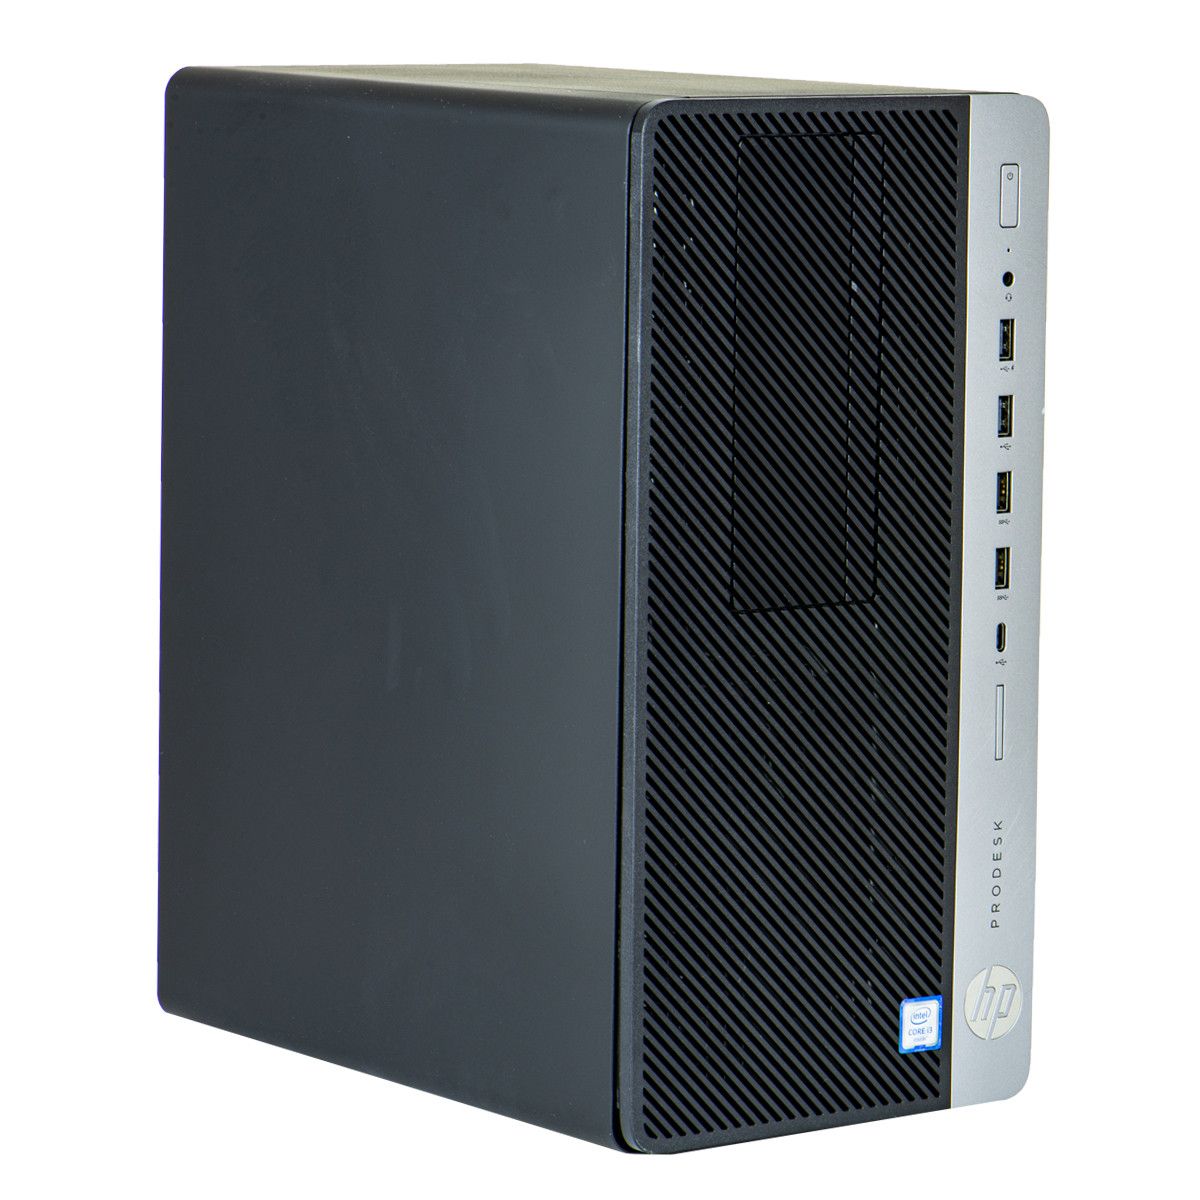 HP Prodesk 600 G3, Core i3-6100 3.70GHz, 8GB DDR4, 256GB SSD, Tower, calculator refurbished_3